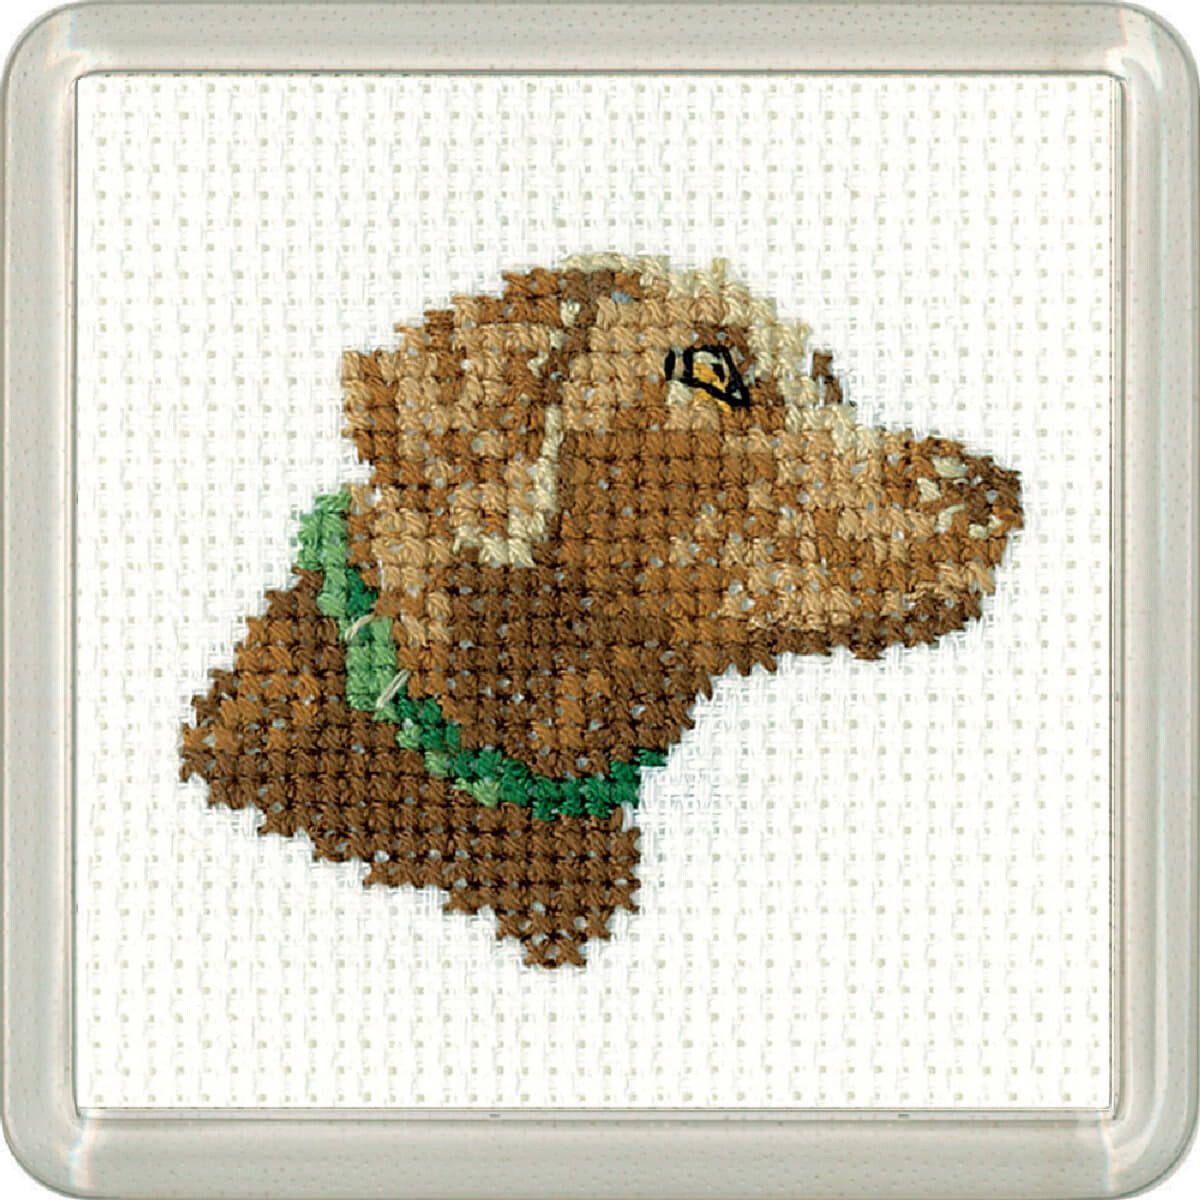 Heritage counted cross stitch kit with Coaster, Aida...